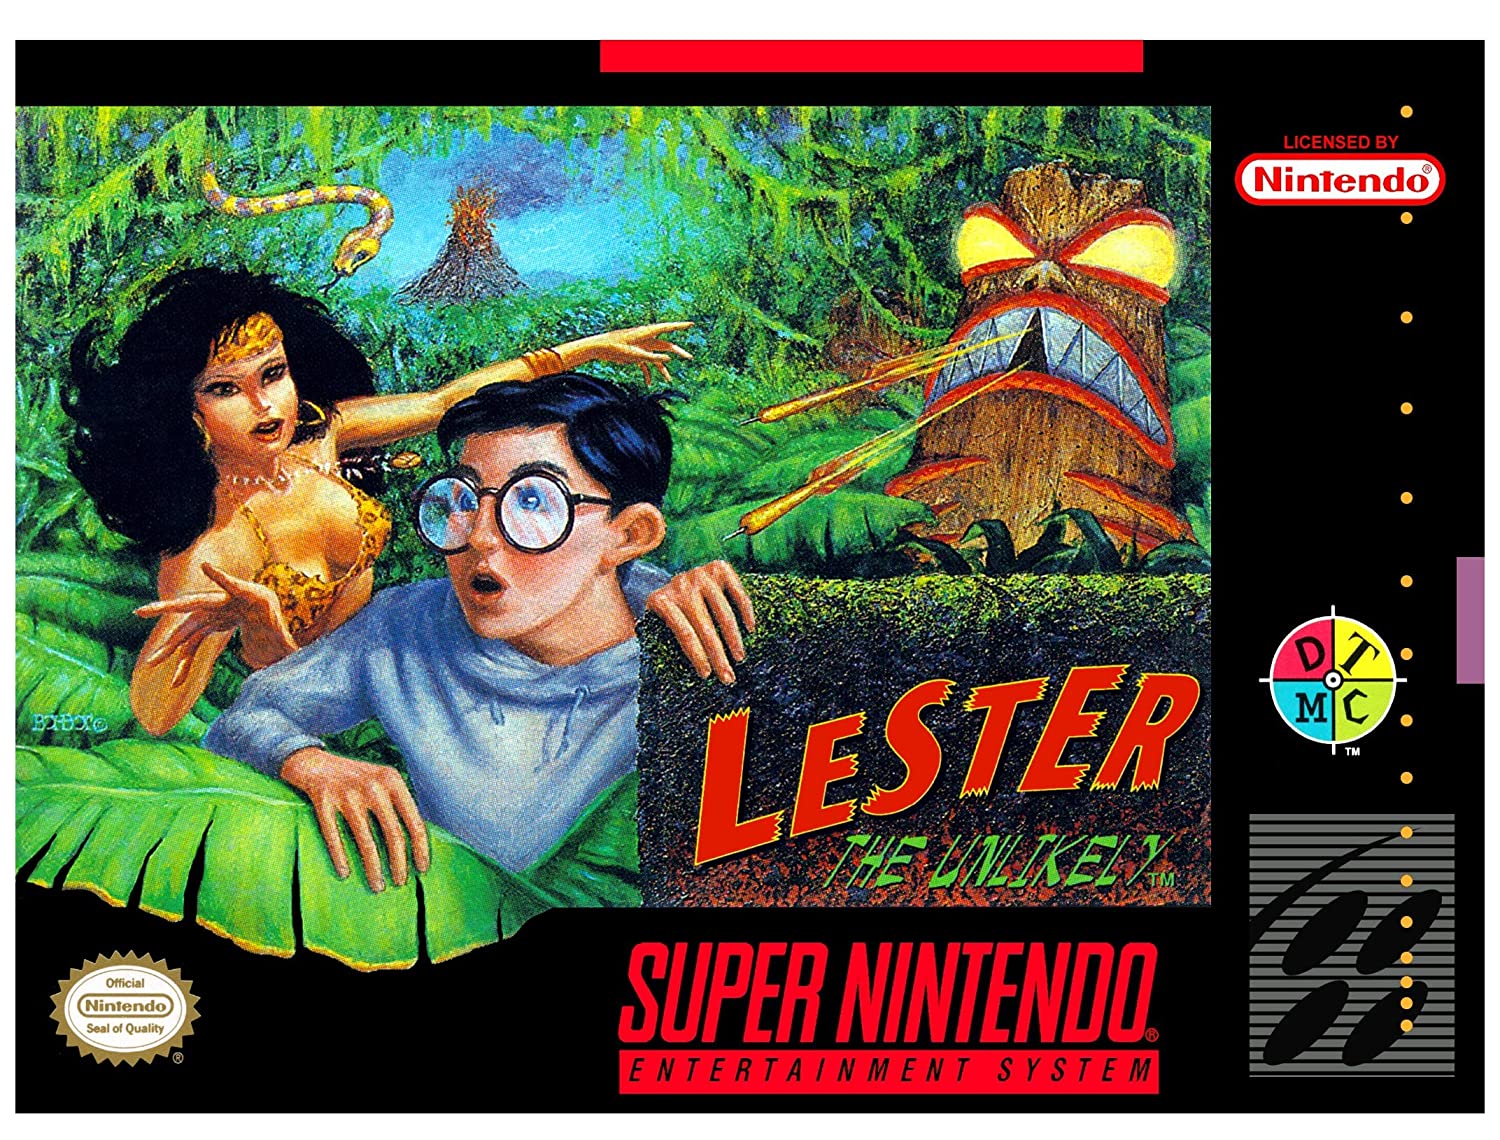 Bad Video Game Heroes - Lester the Unlikely